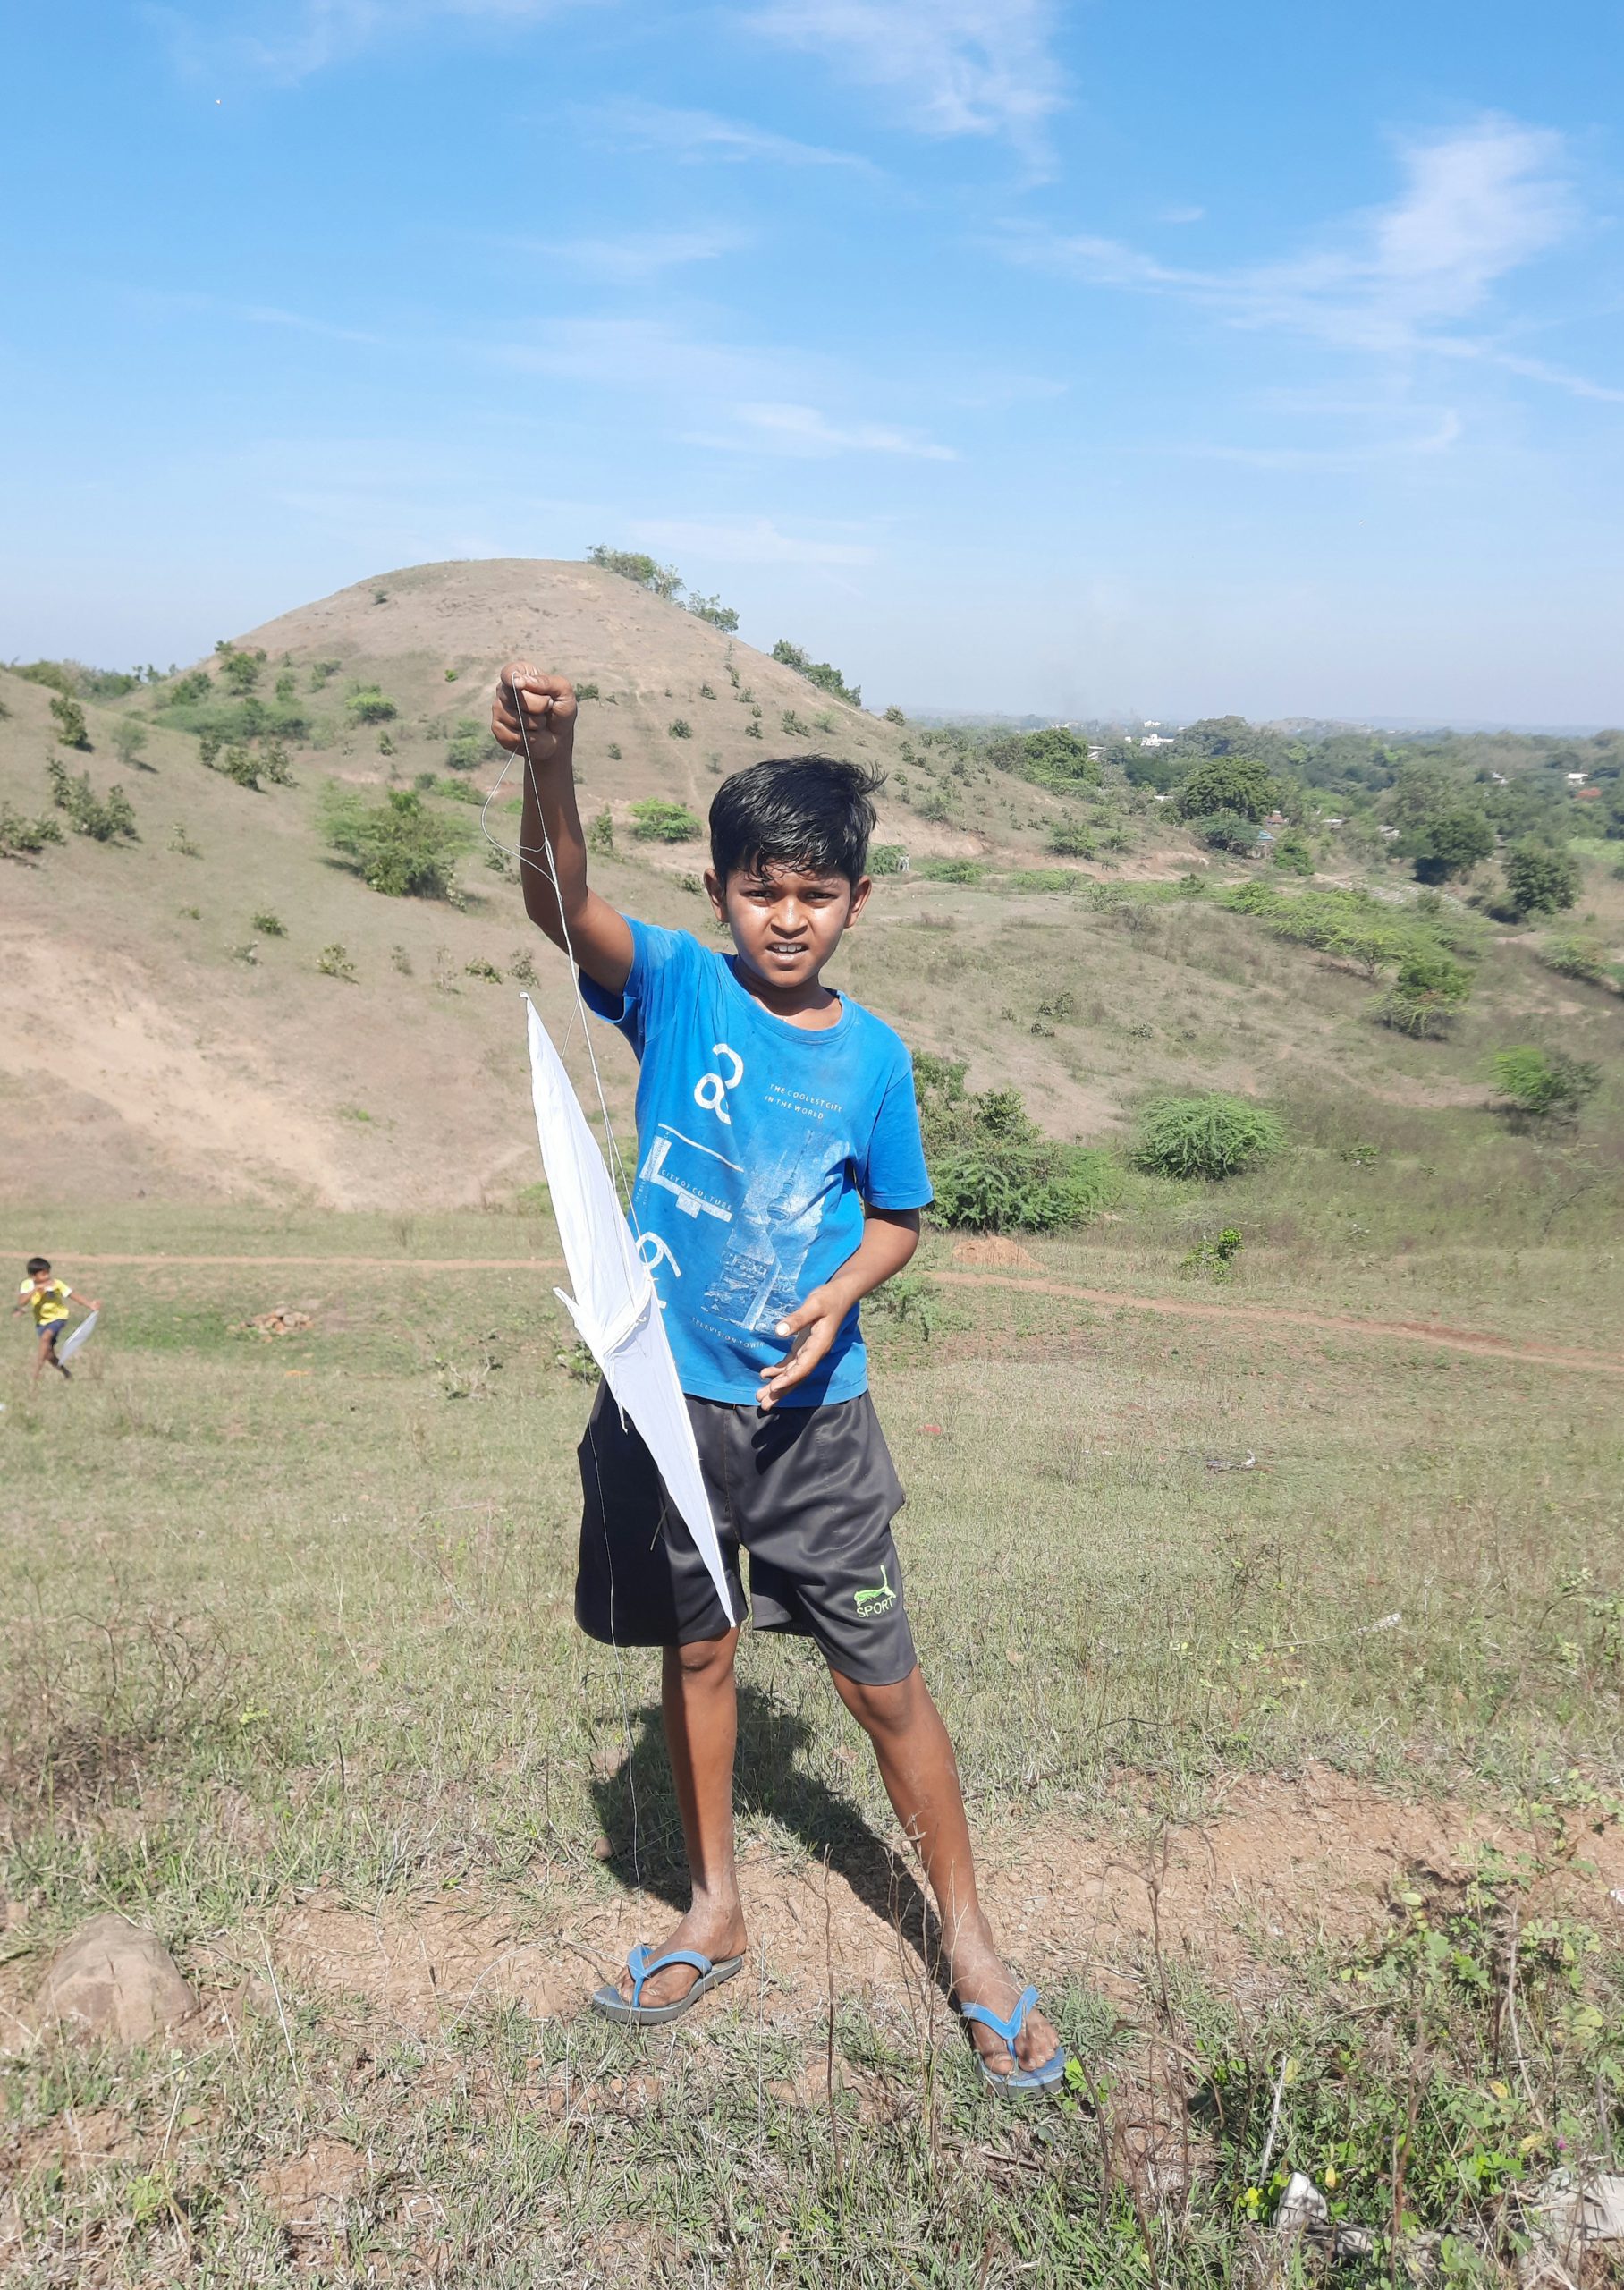 A kid flying a kite